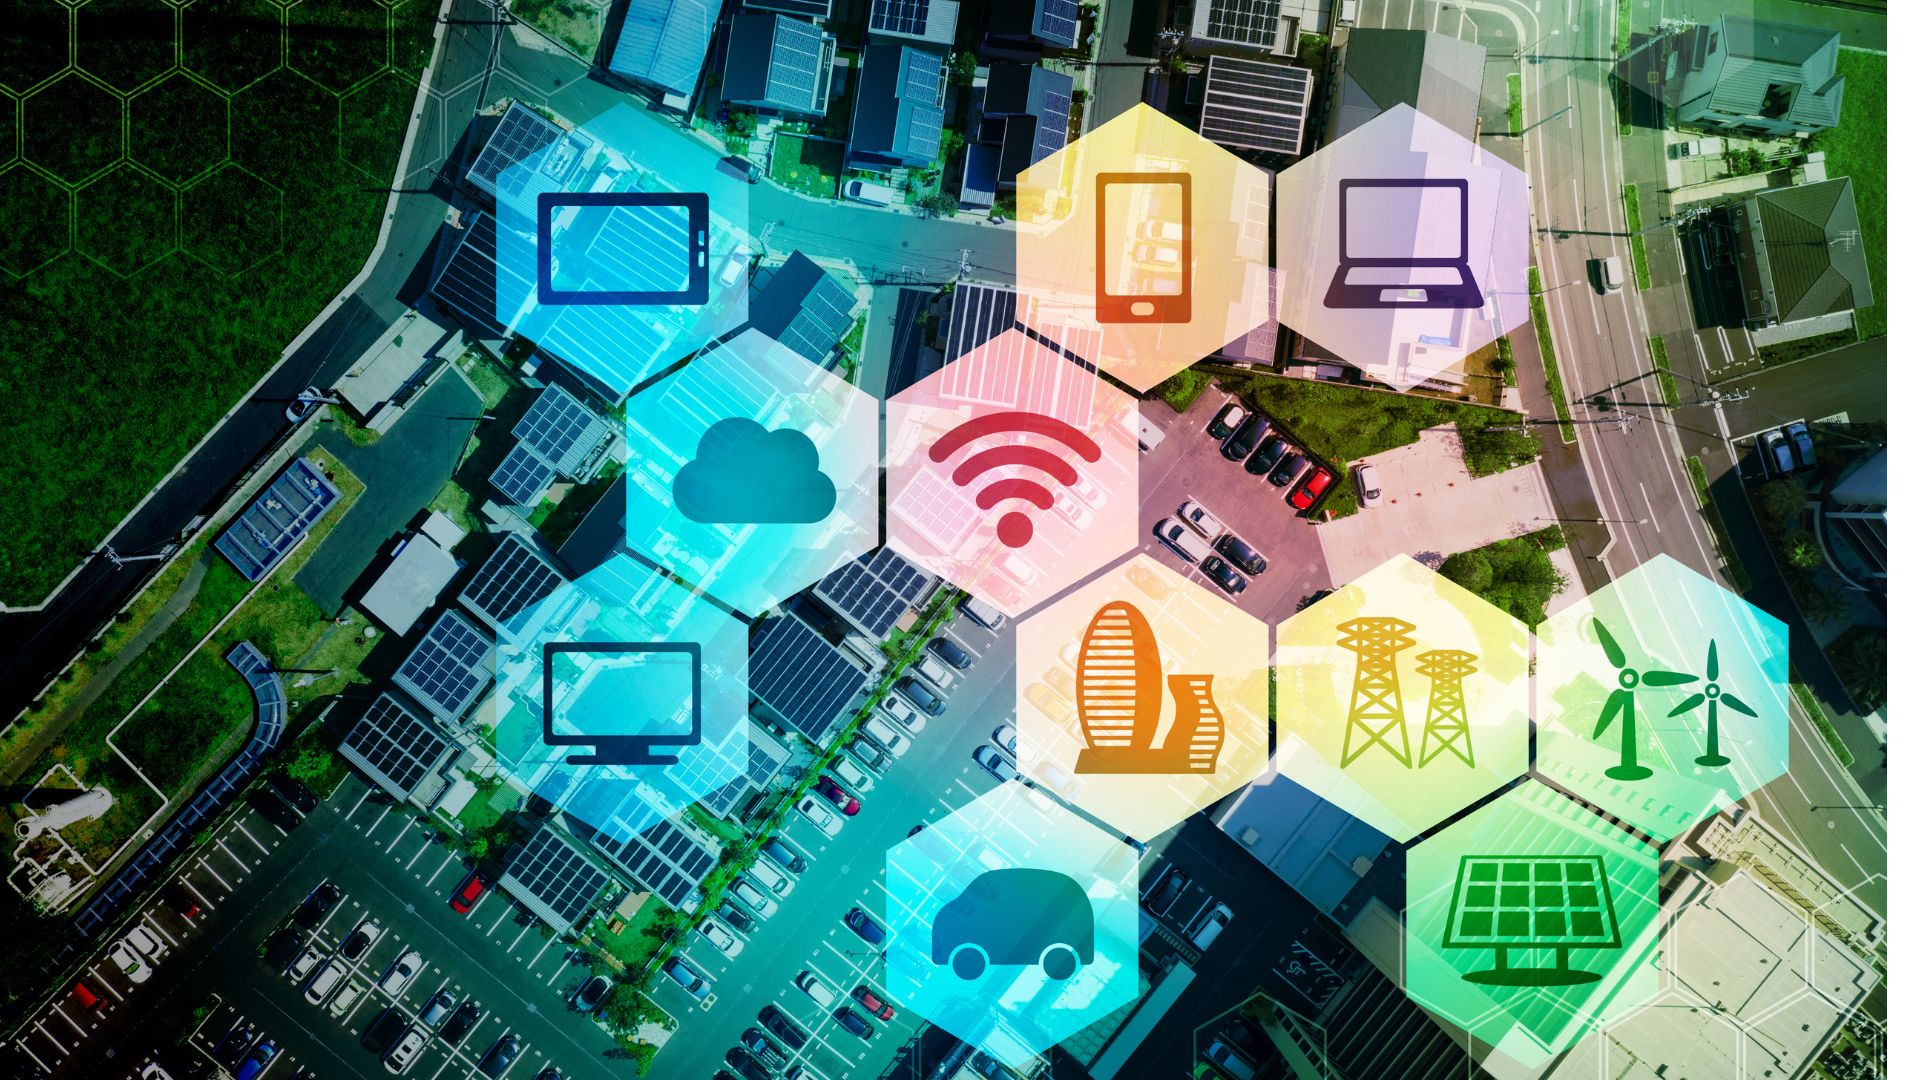 A glimpse into the future of smart cities, showcasing the potential of IoT technology in urban development.